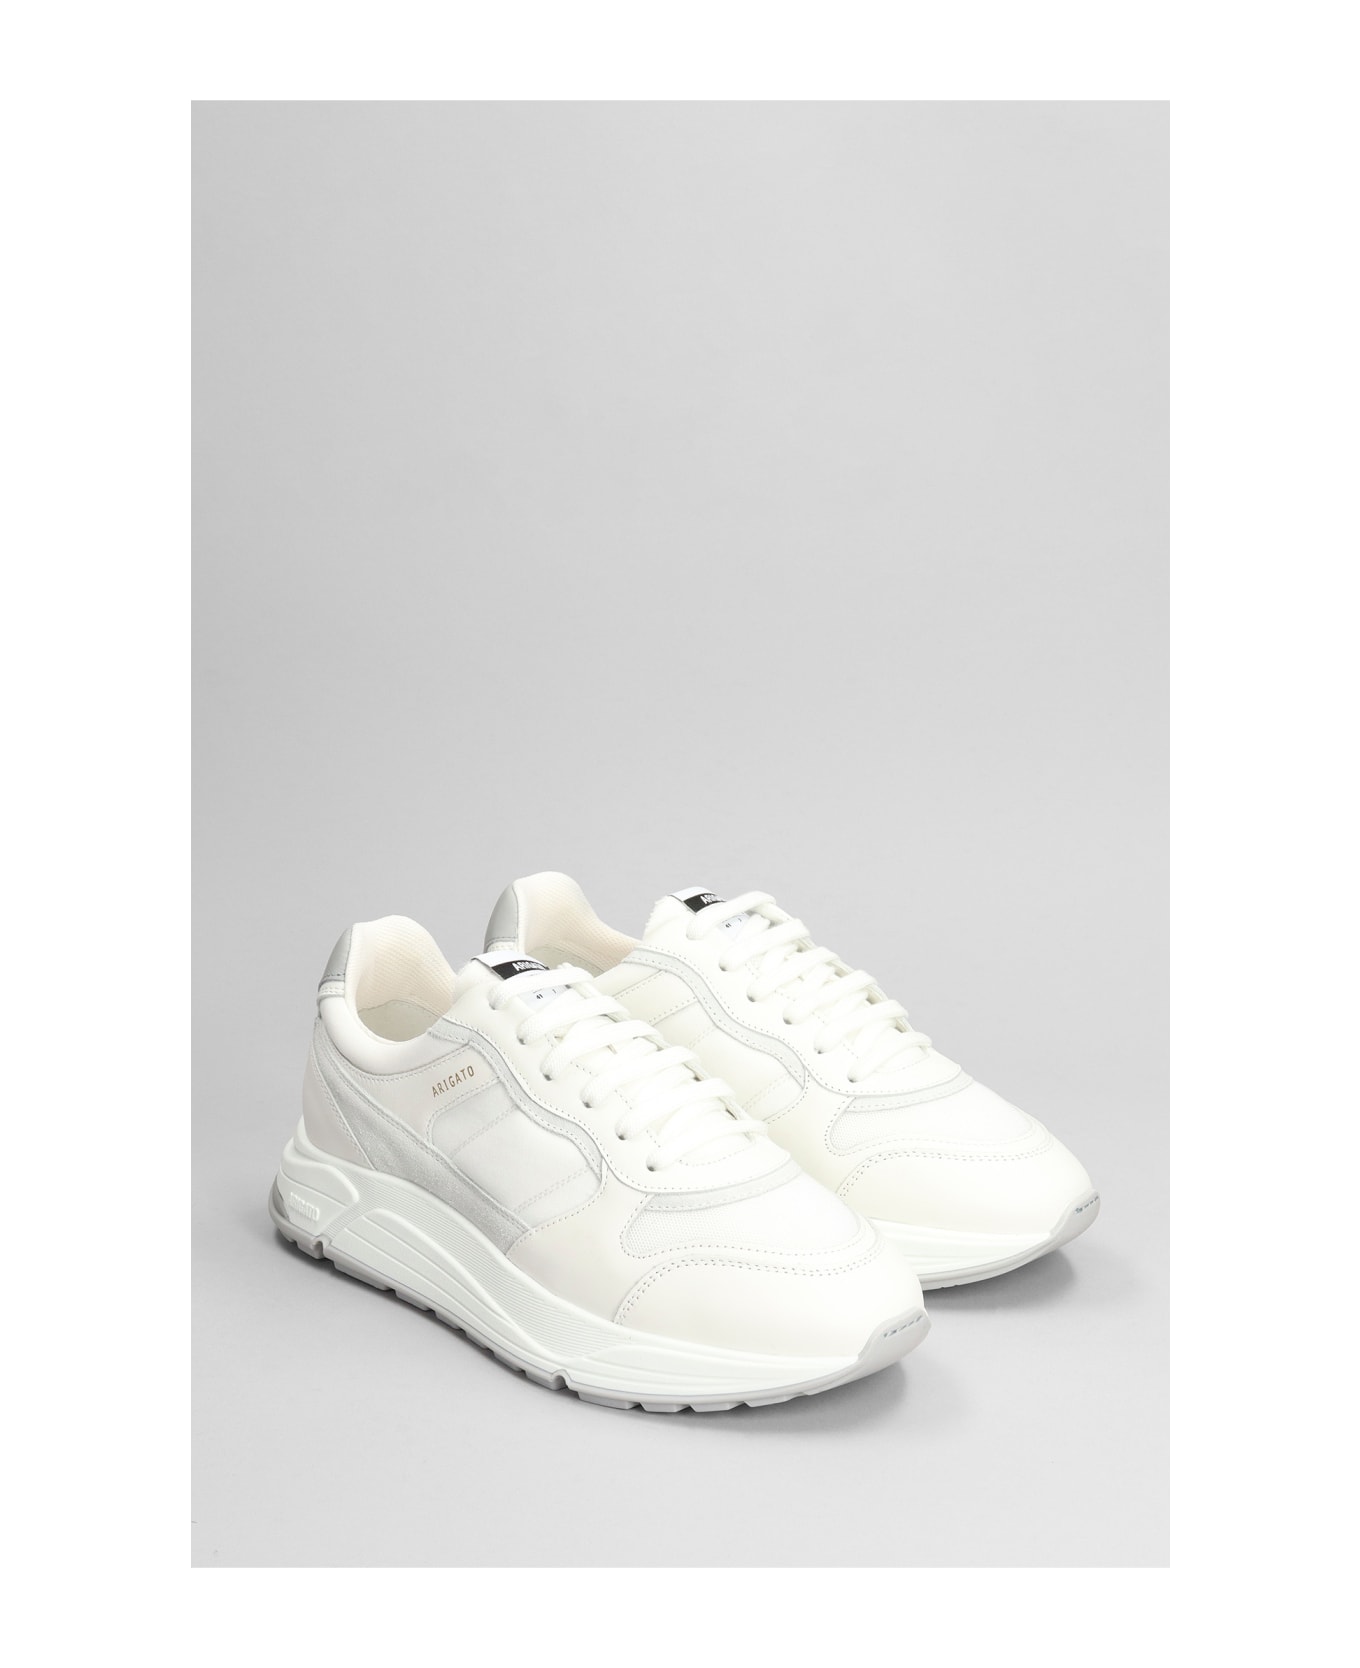 Axel Arigato Rush Sneakers In White Leather And Fabric - Bianco grigio スニーカー